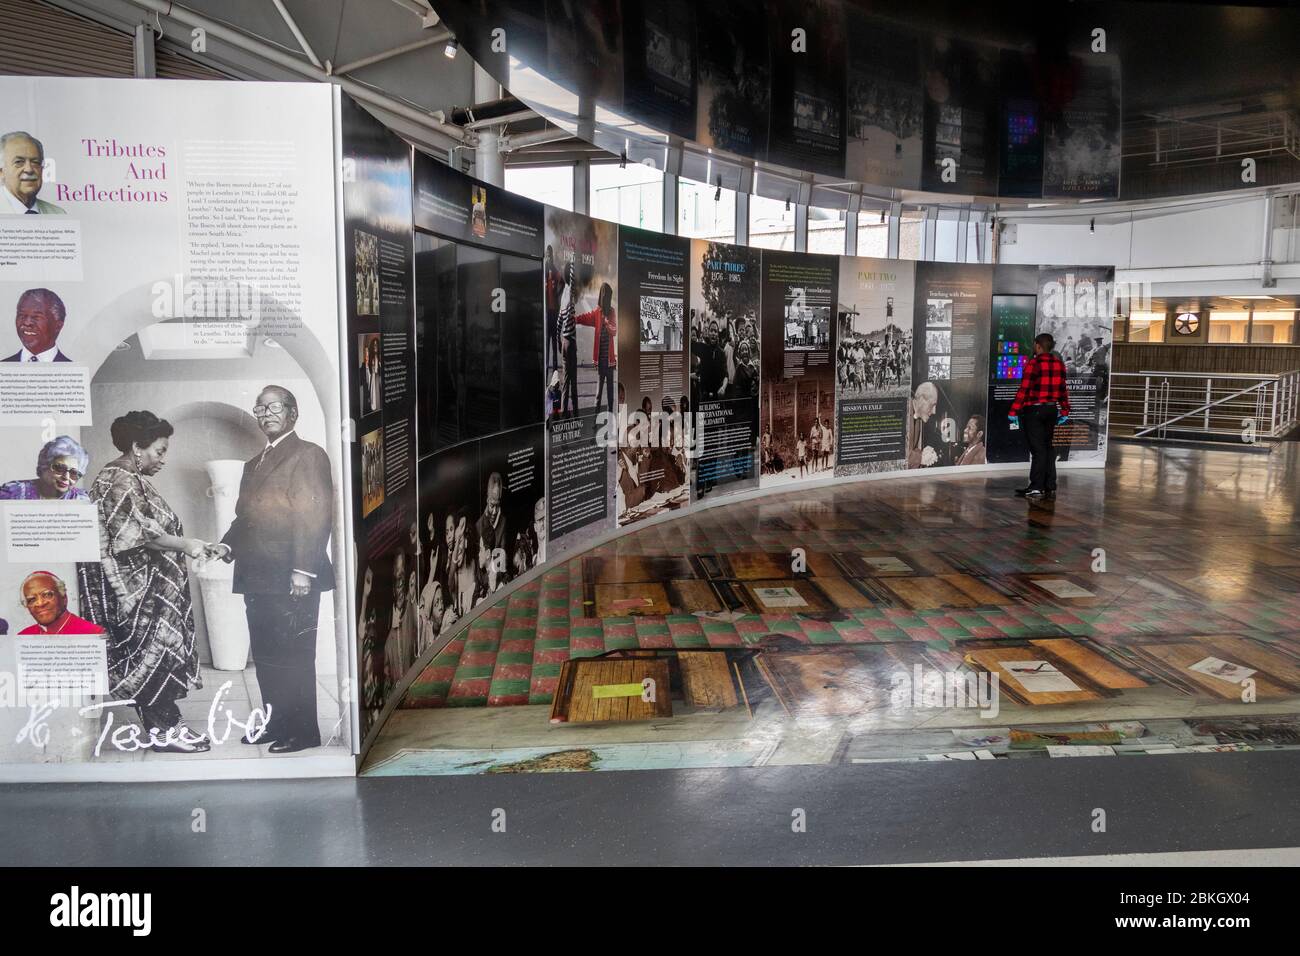 South Africa, Western Cape, Johannesburg, OR Tambo International Airport interior, Oliver Tambo history display at airside viewing area Stock Photo